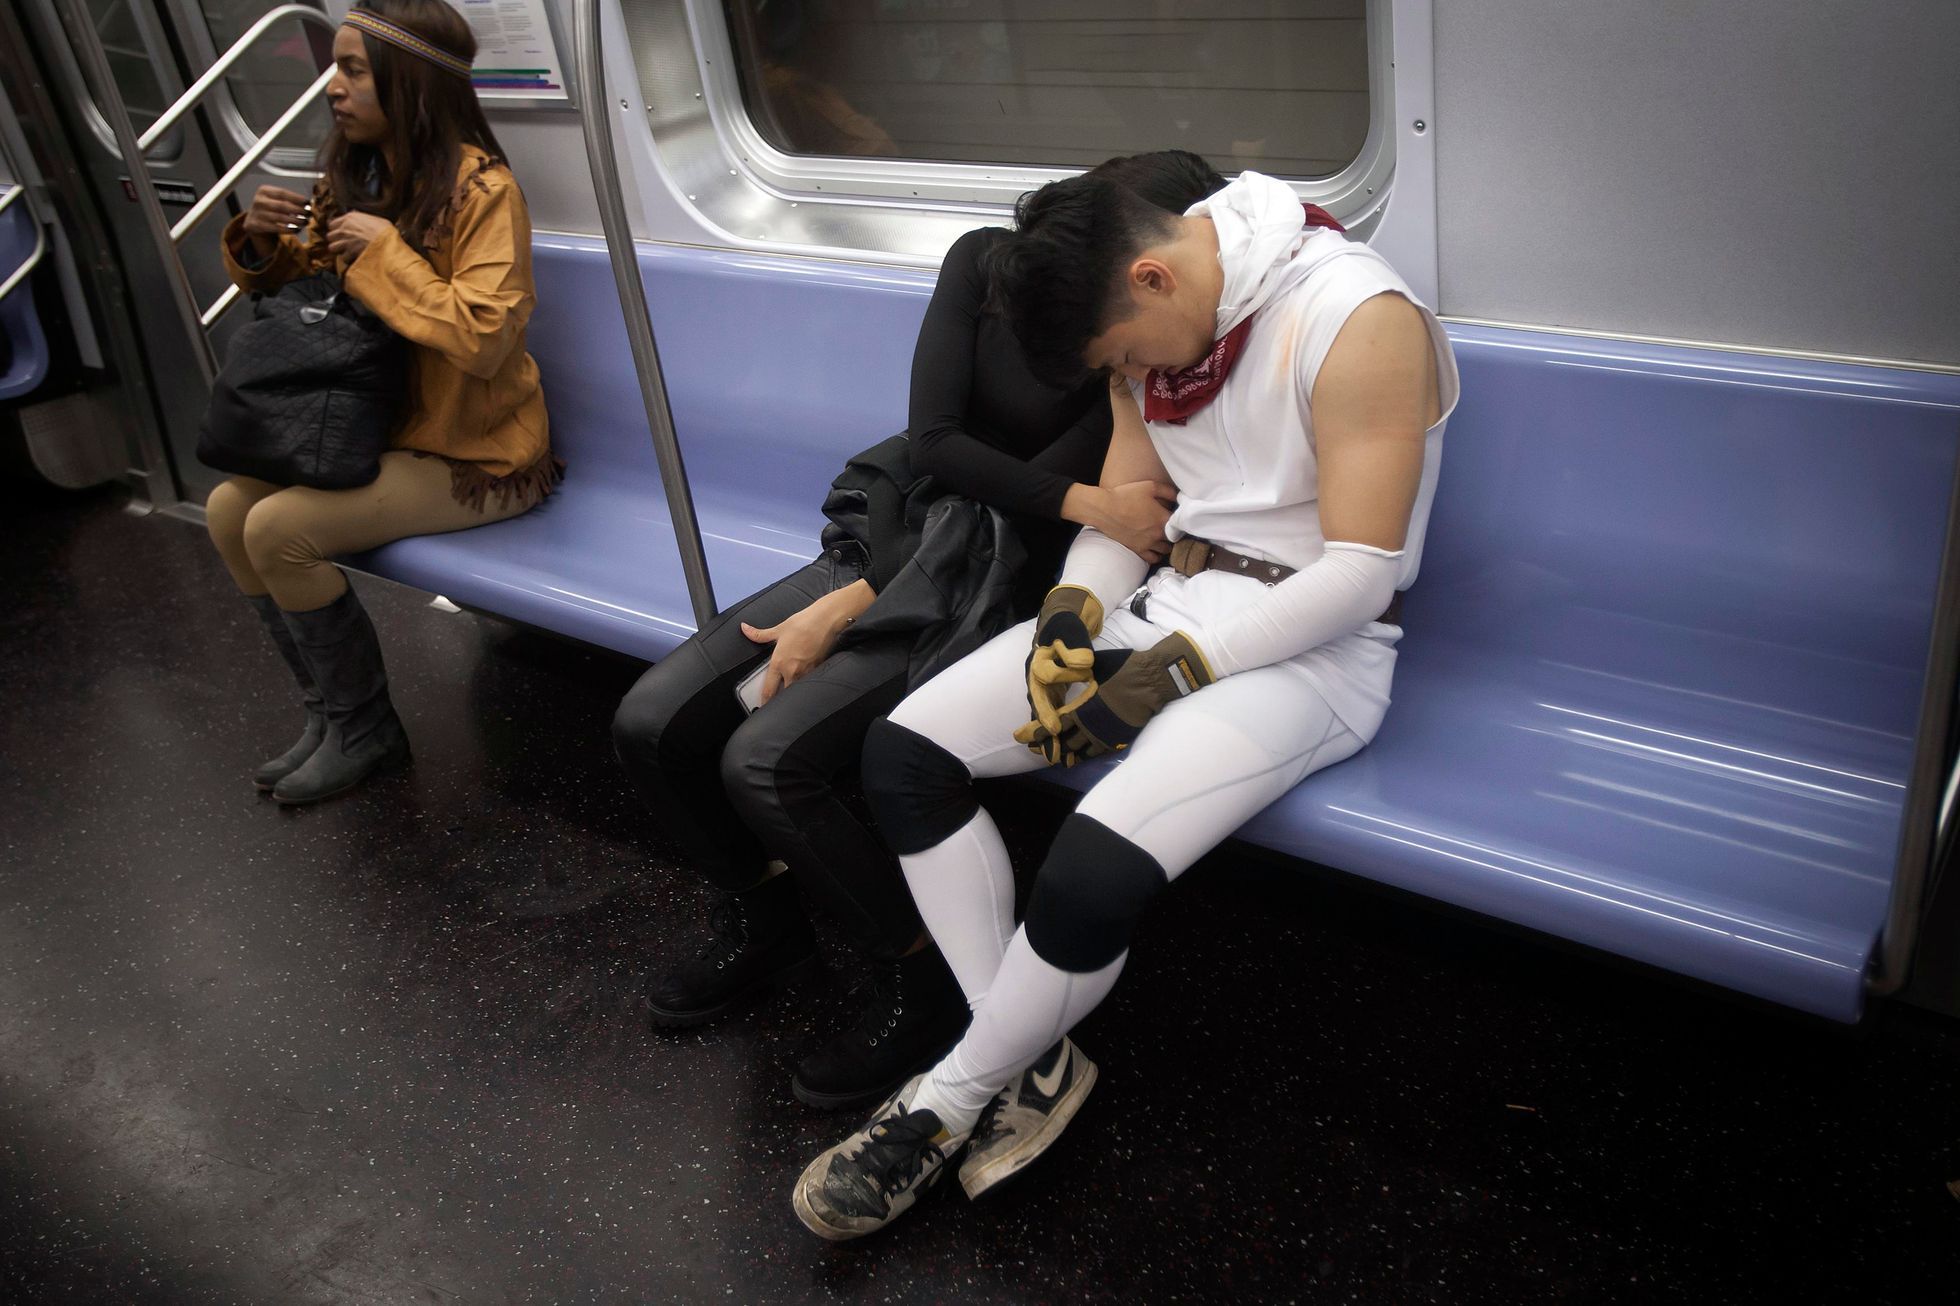 Halloween revellers sleep on the uptown 6 subway train early in the morning in the Manhattan borough of New York